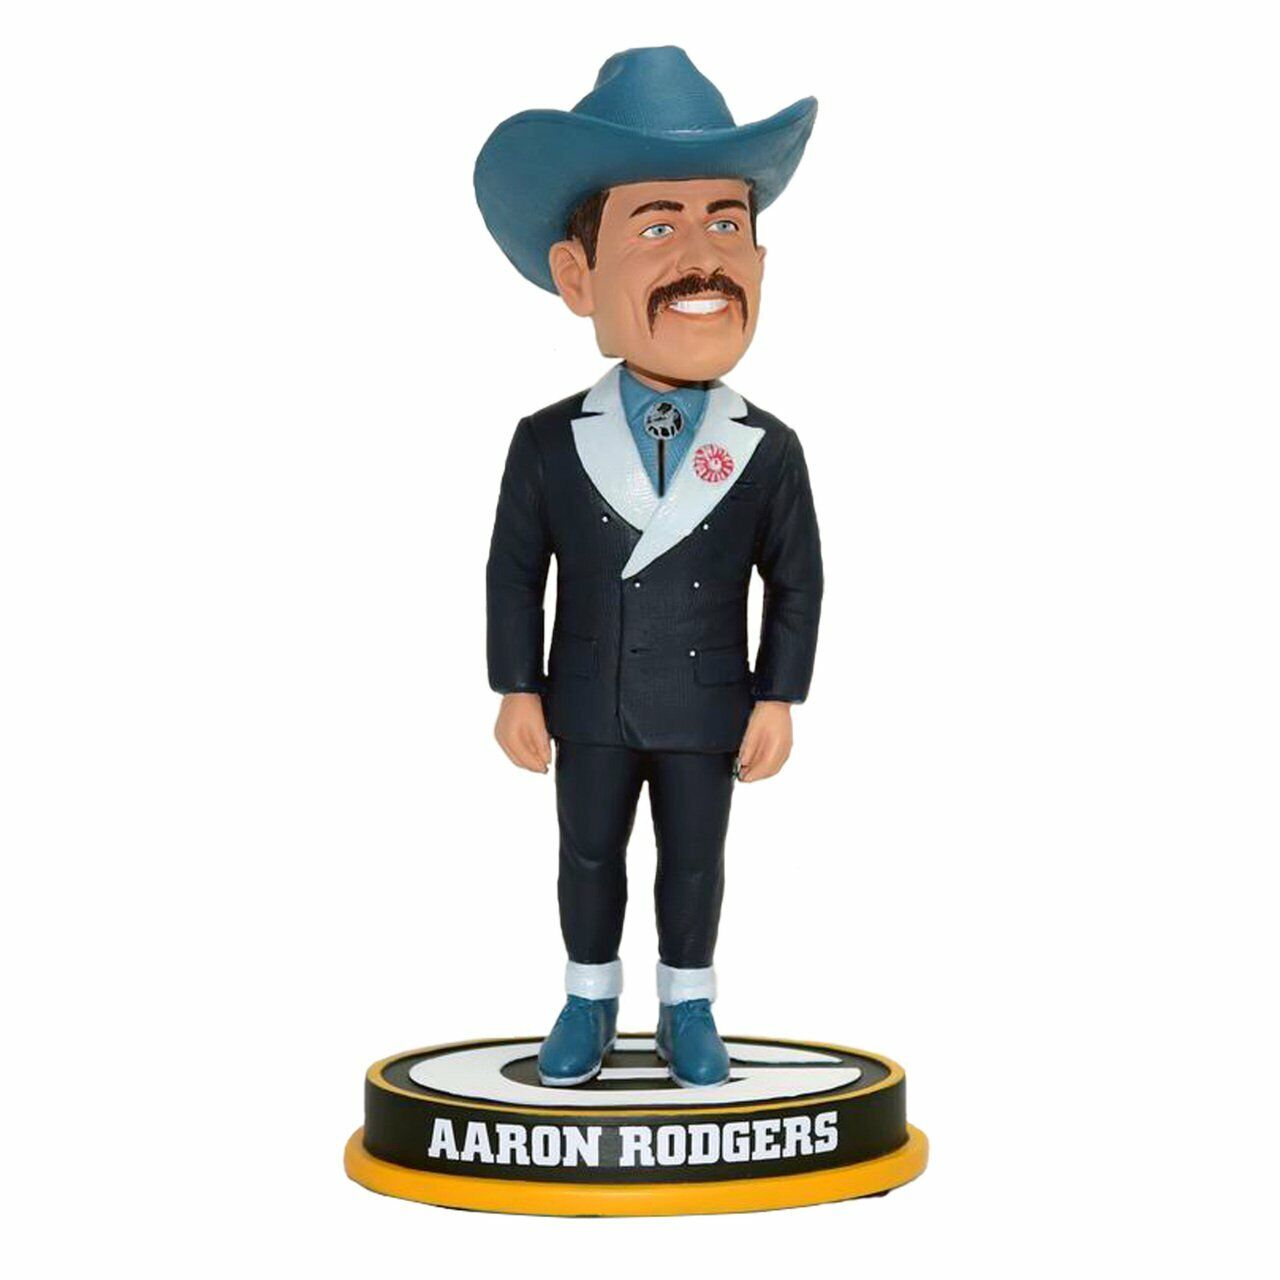 Aaron Rodgers Green Bay Packers Canadian tuxedo Bobblehead NFL